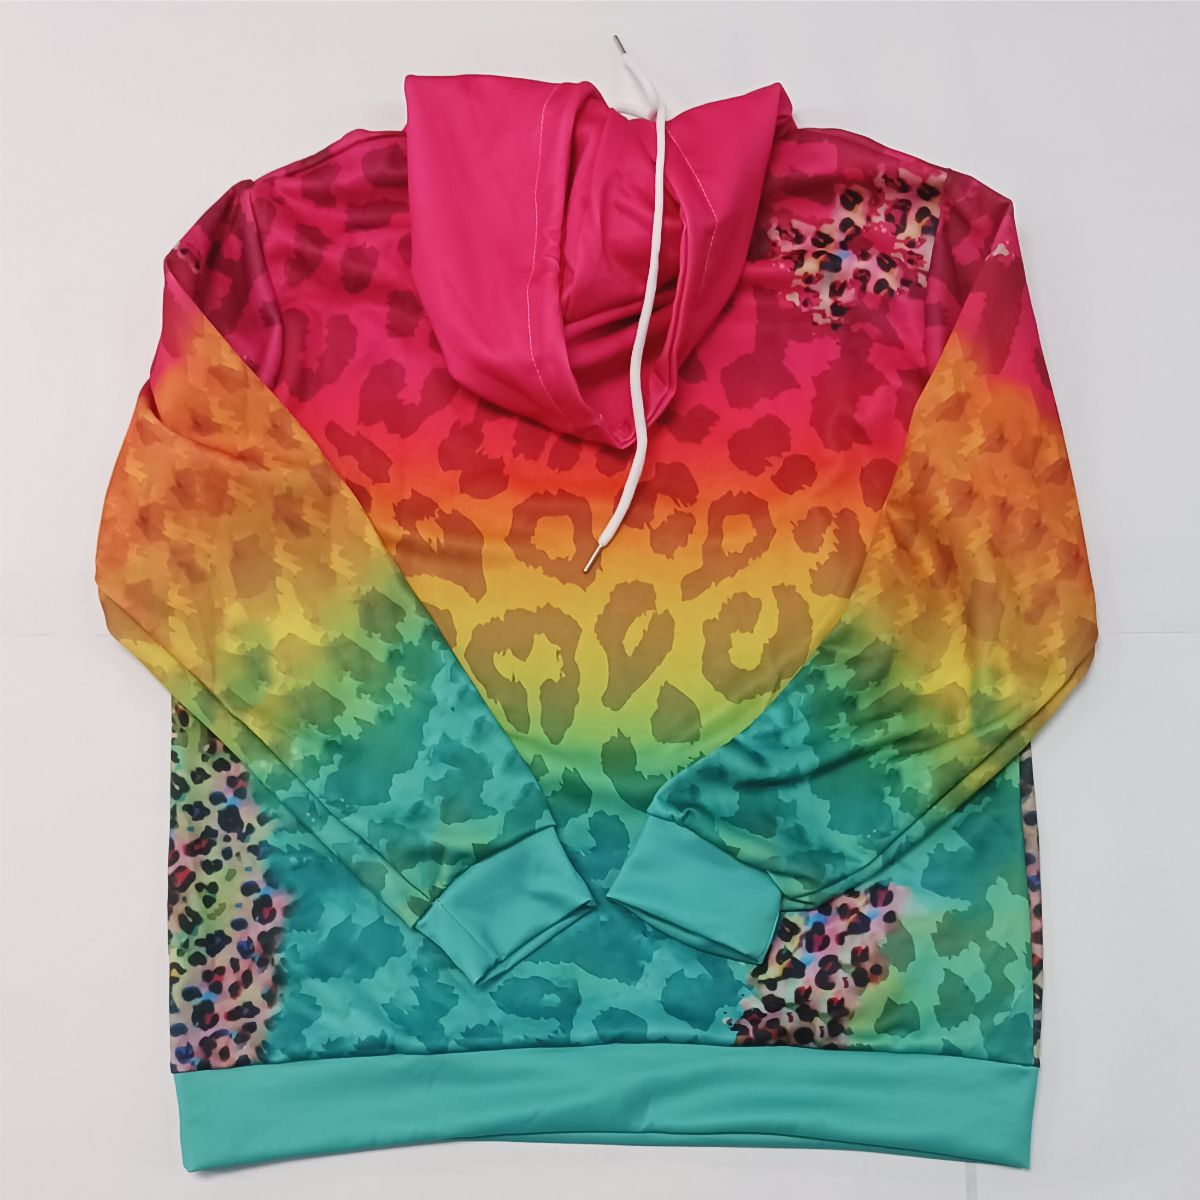 Hoodie 7.37 oz Polyester Full Dye Sublimation #500016 – SPLYPROMO